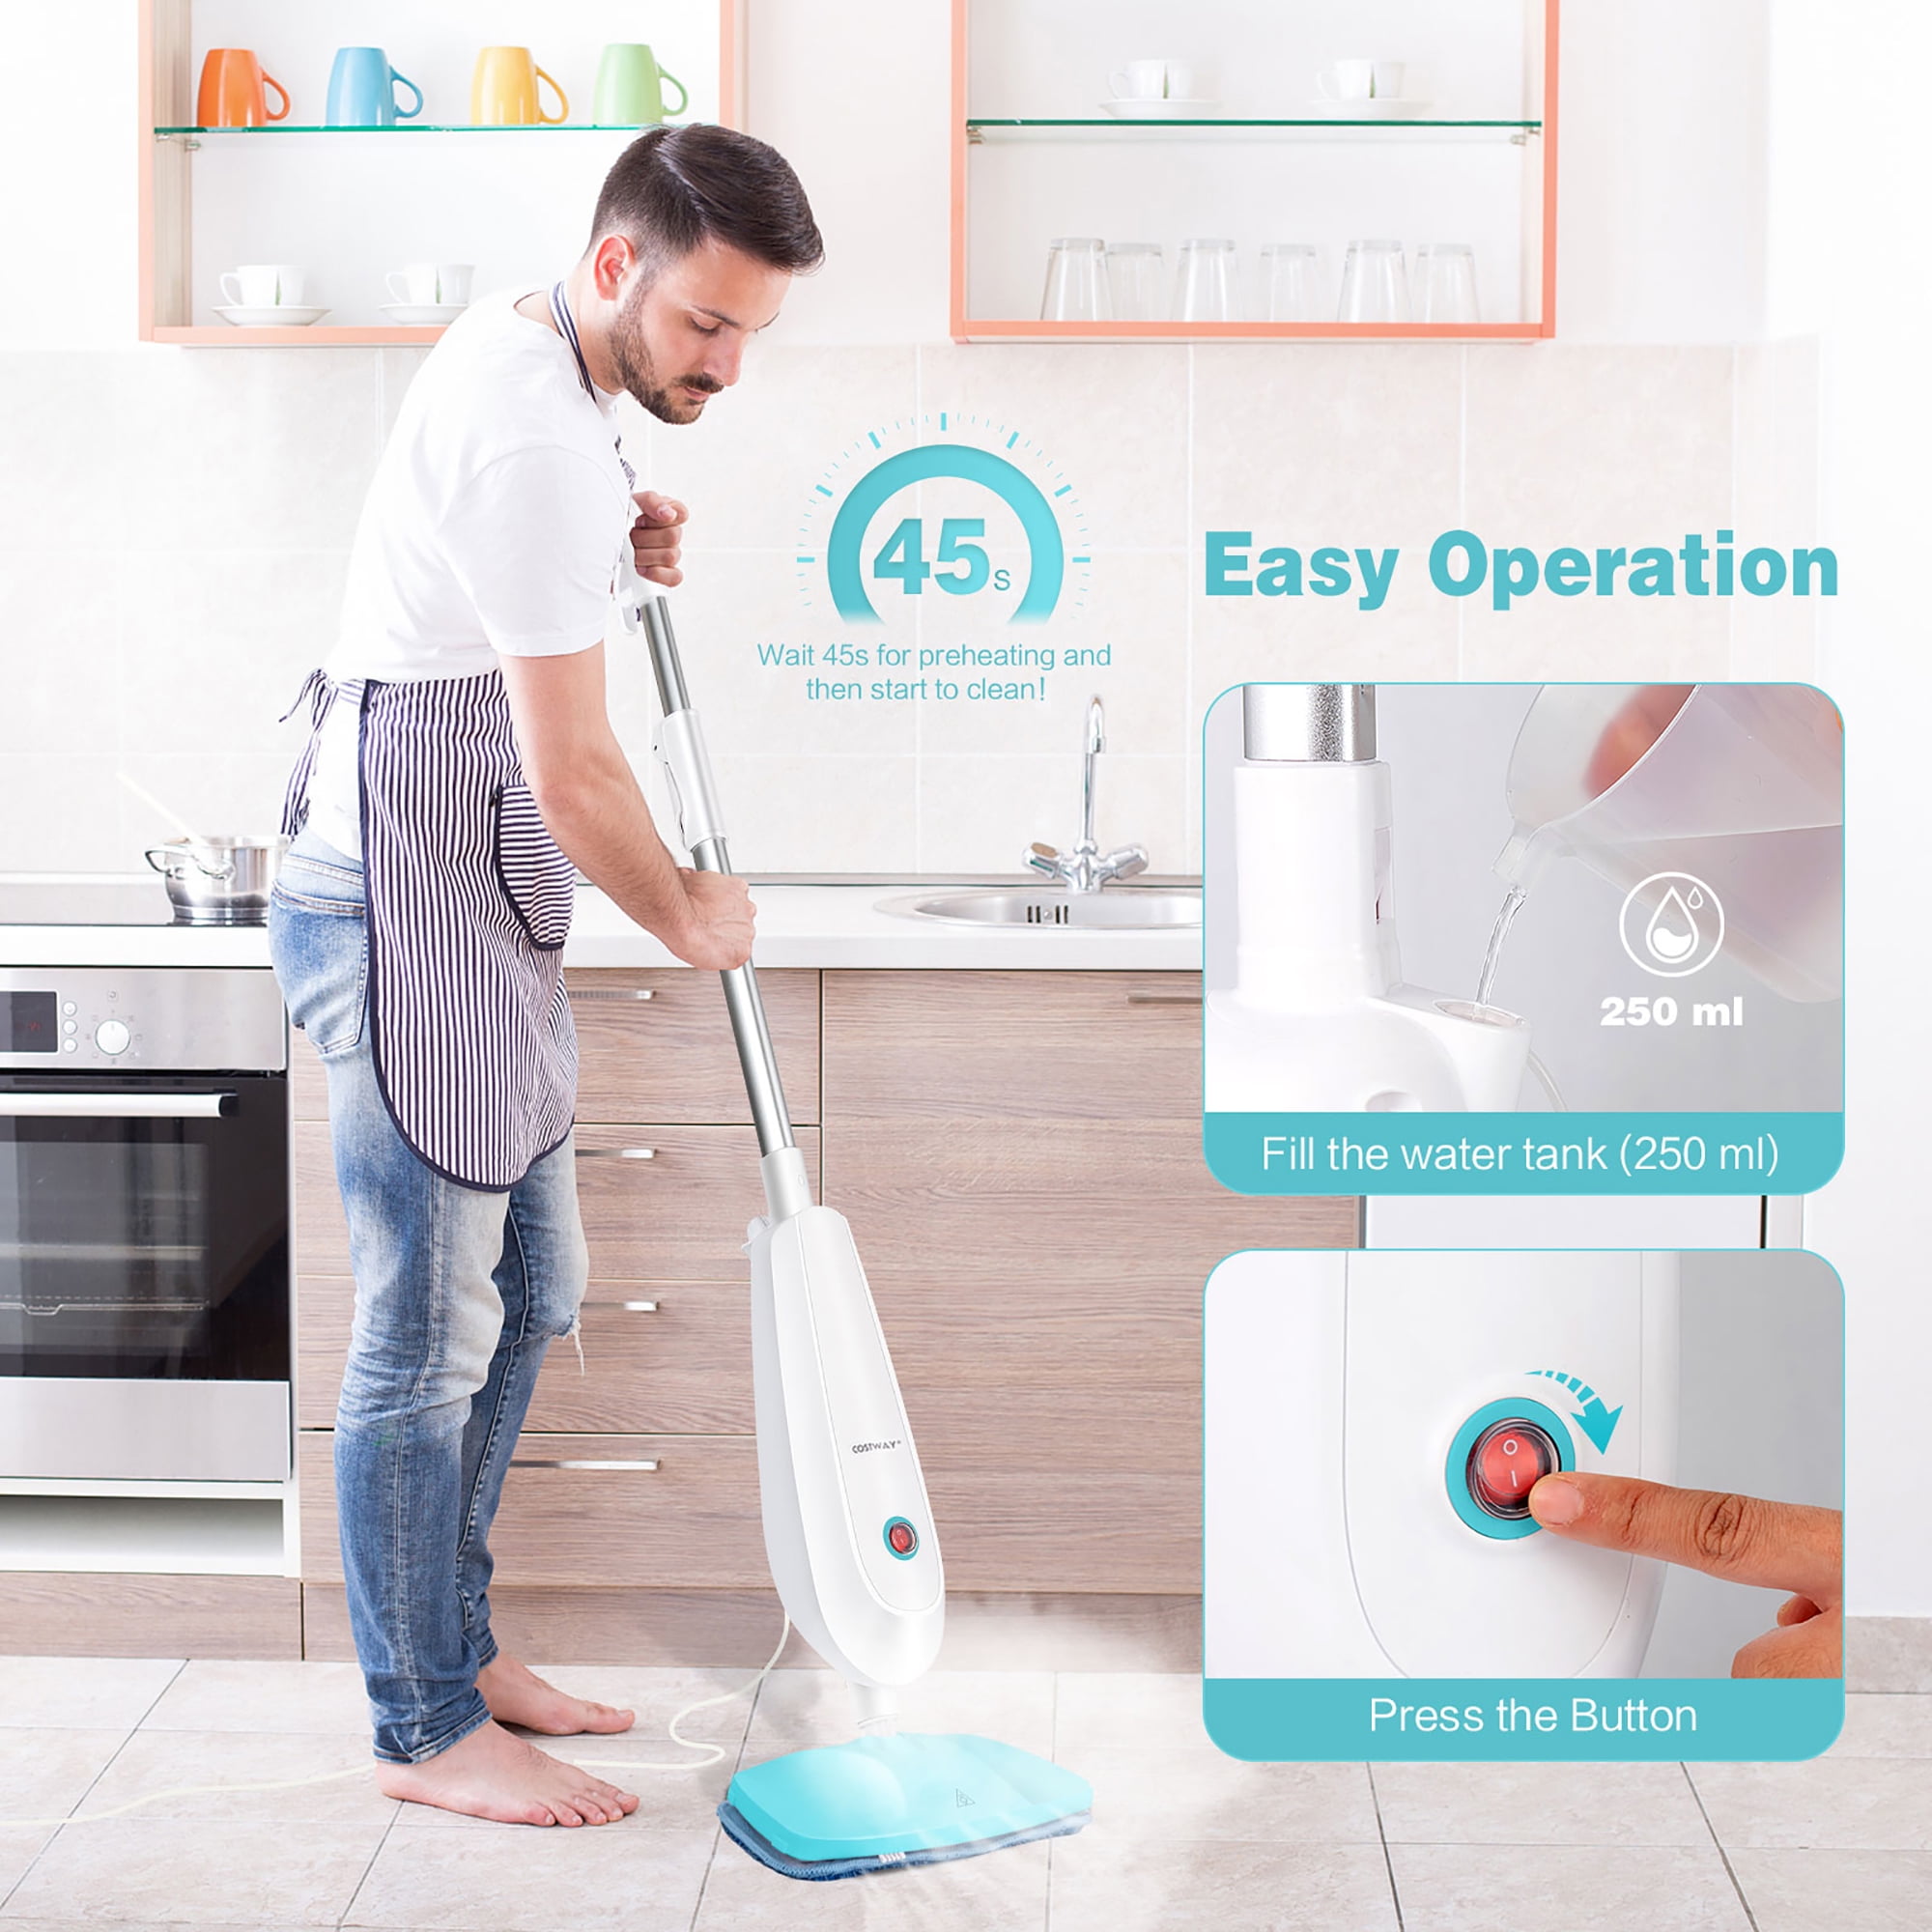 1100W Handheld Detachable Steam Mop with LED Headlights | Costway